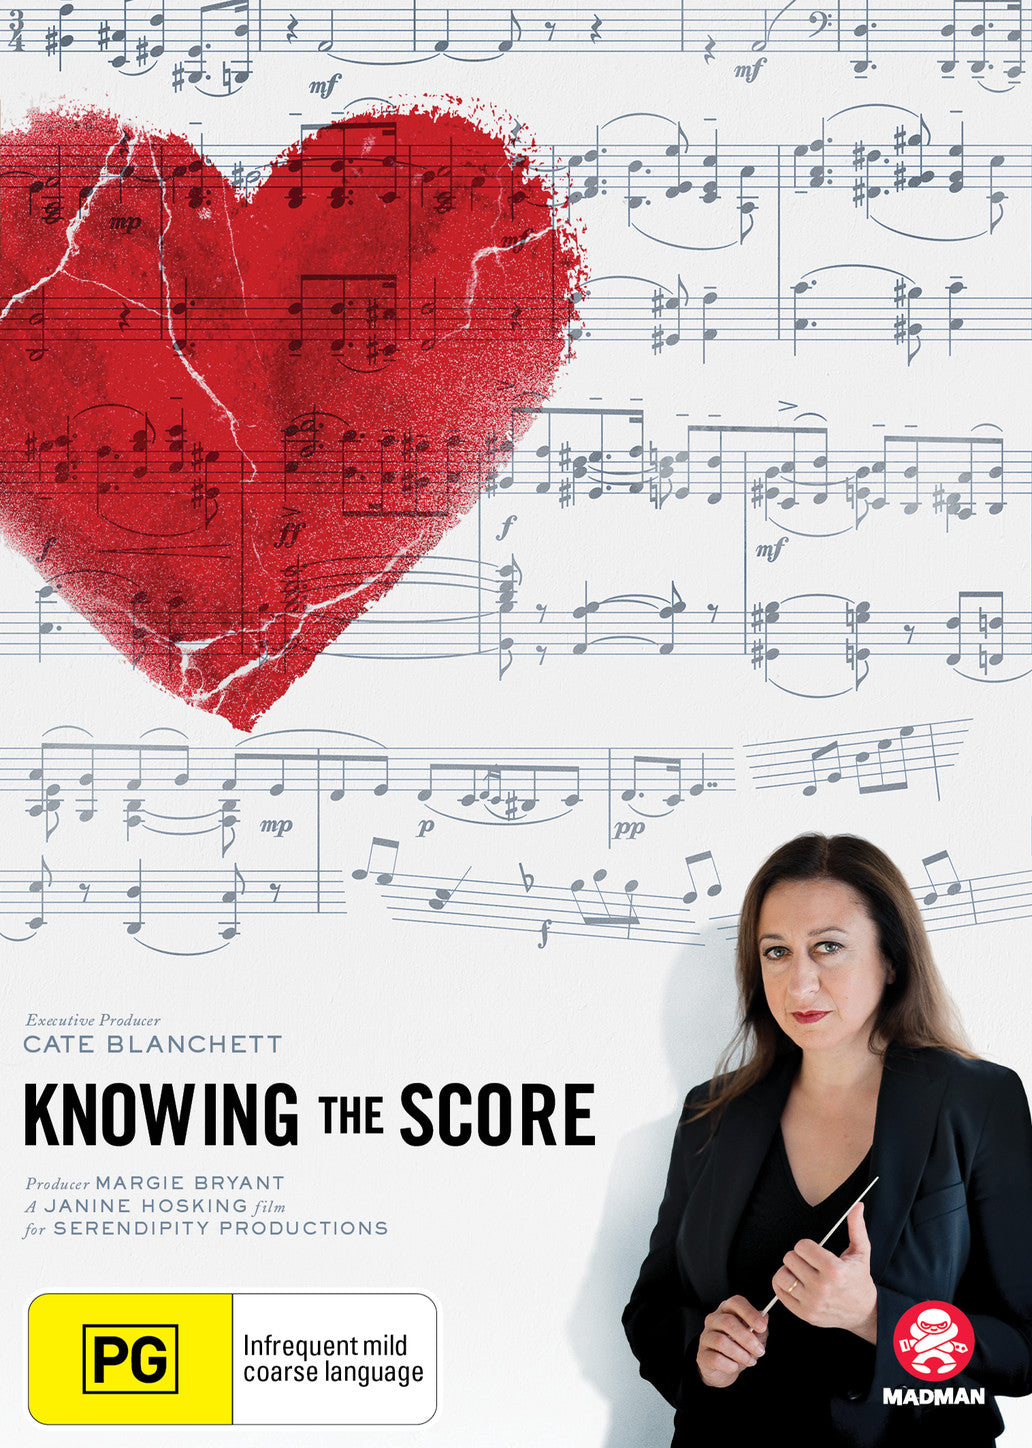 KNOWING THE SCORE